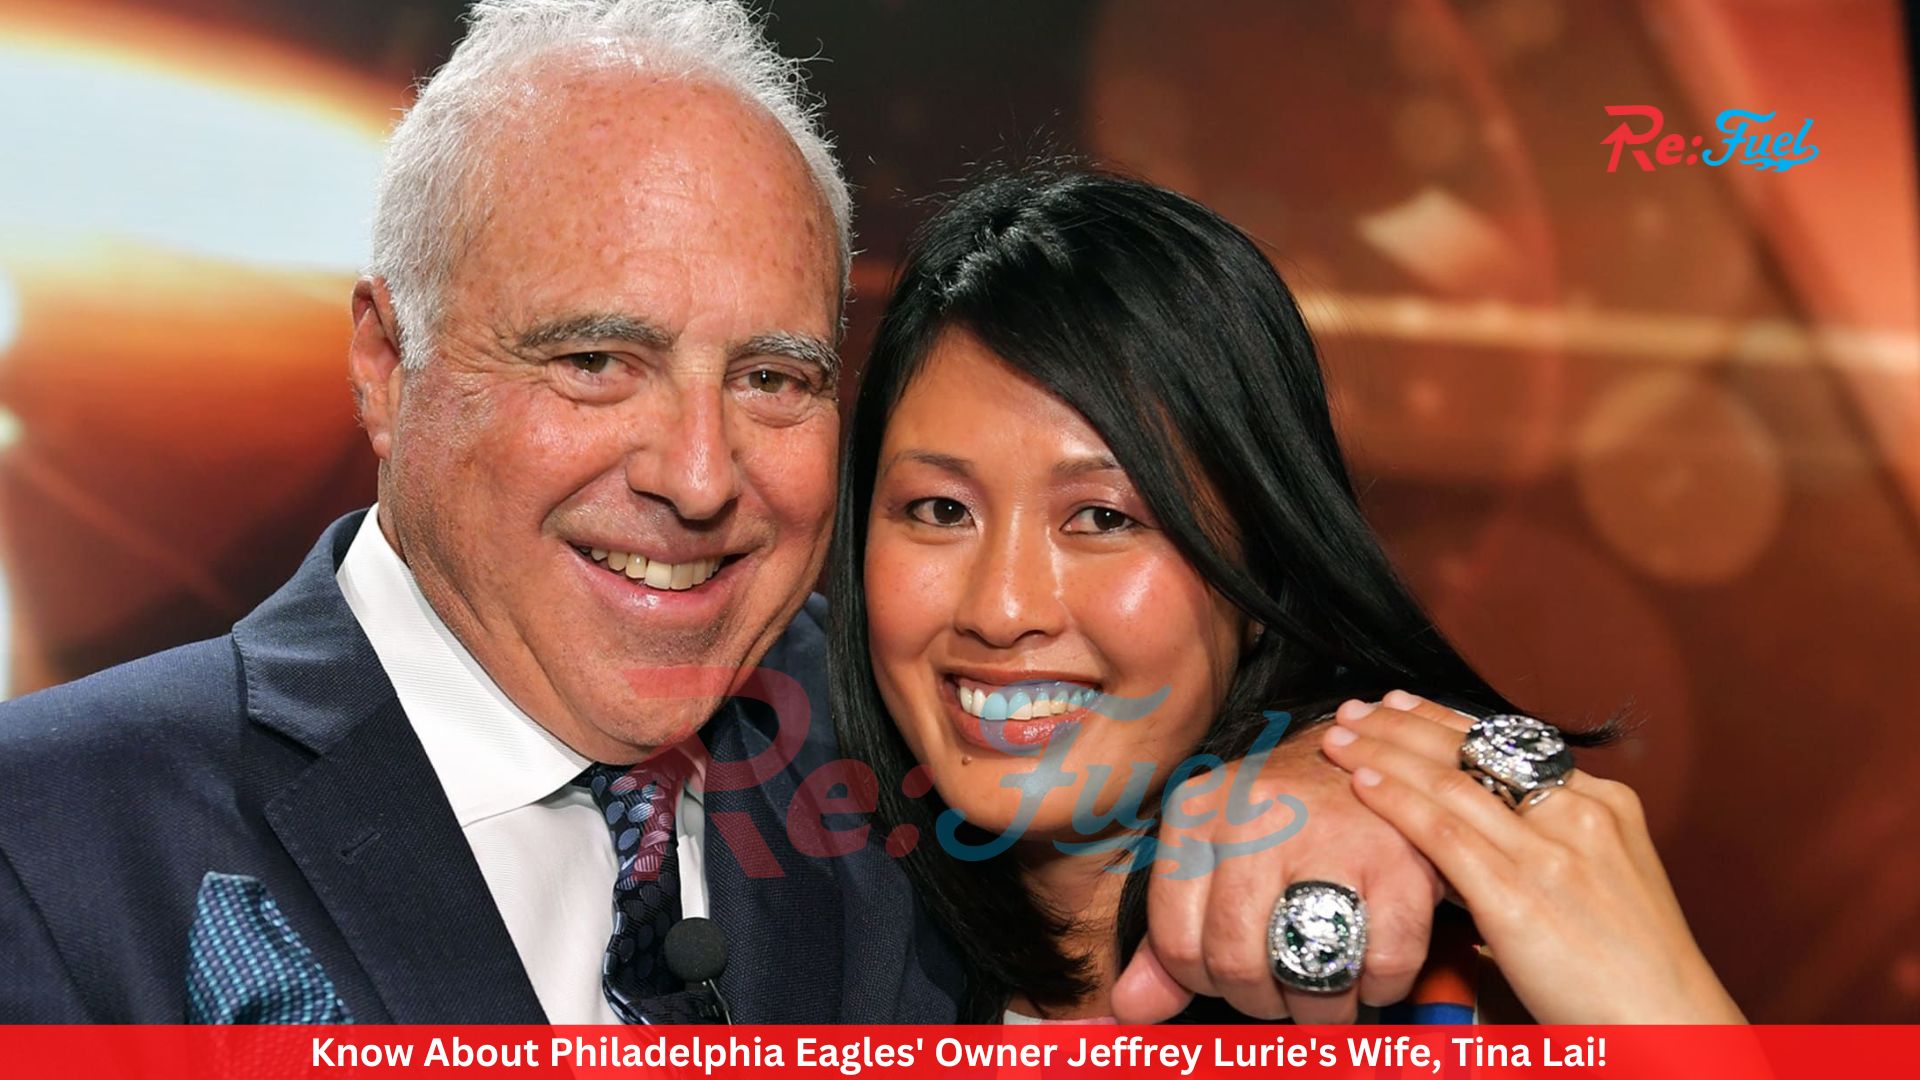 Know About Philadelphia Eagles' Owner Jeffrey Lurie's Wife, Tina Lai!